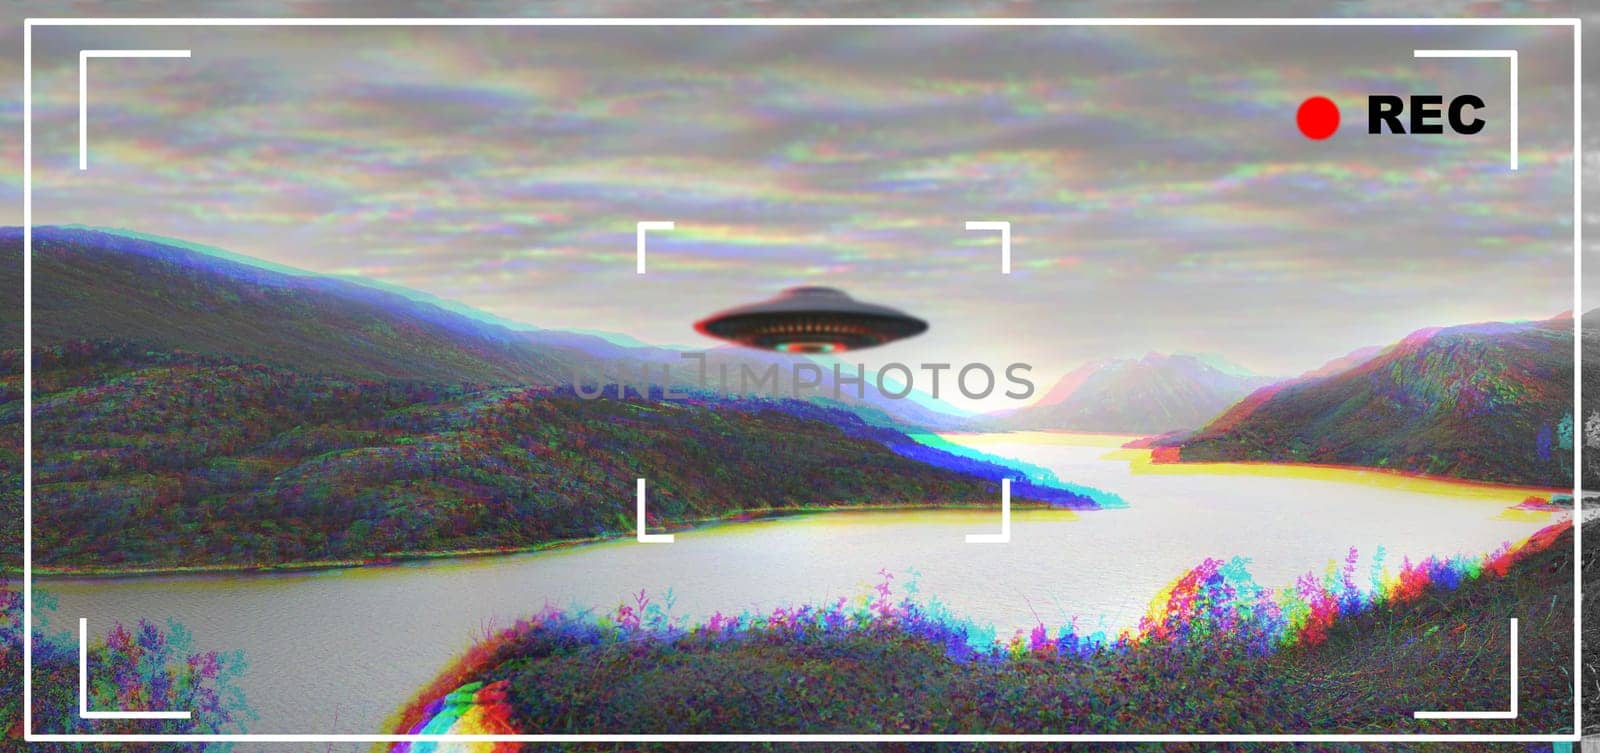 UFO, alien and camcorder viewfinder with a spaceship flying in the sky over area 51 for an invasion. Camera, spacecraft and conspiracy theory with a saucer on a display to record a sighting of aliens.